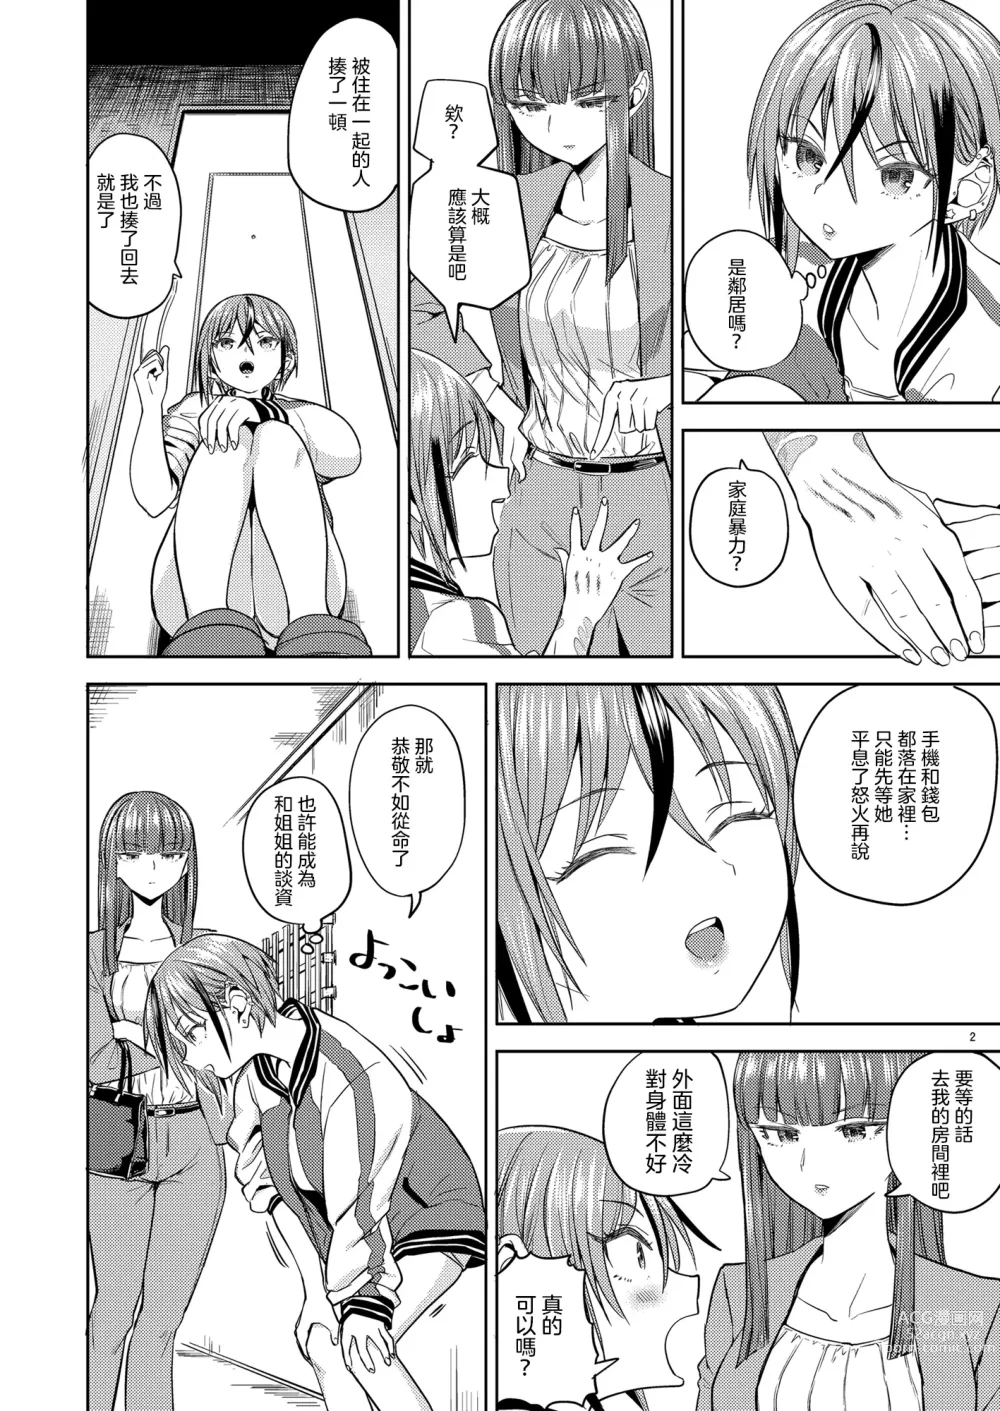 Page 4 of doujinshi 當我們全裸相擁抱之時